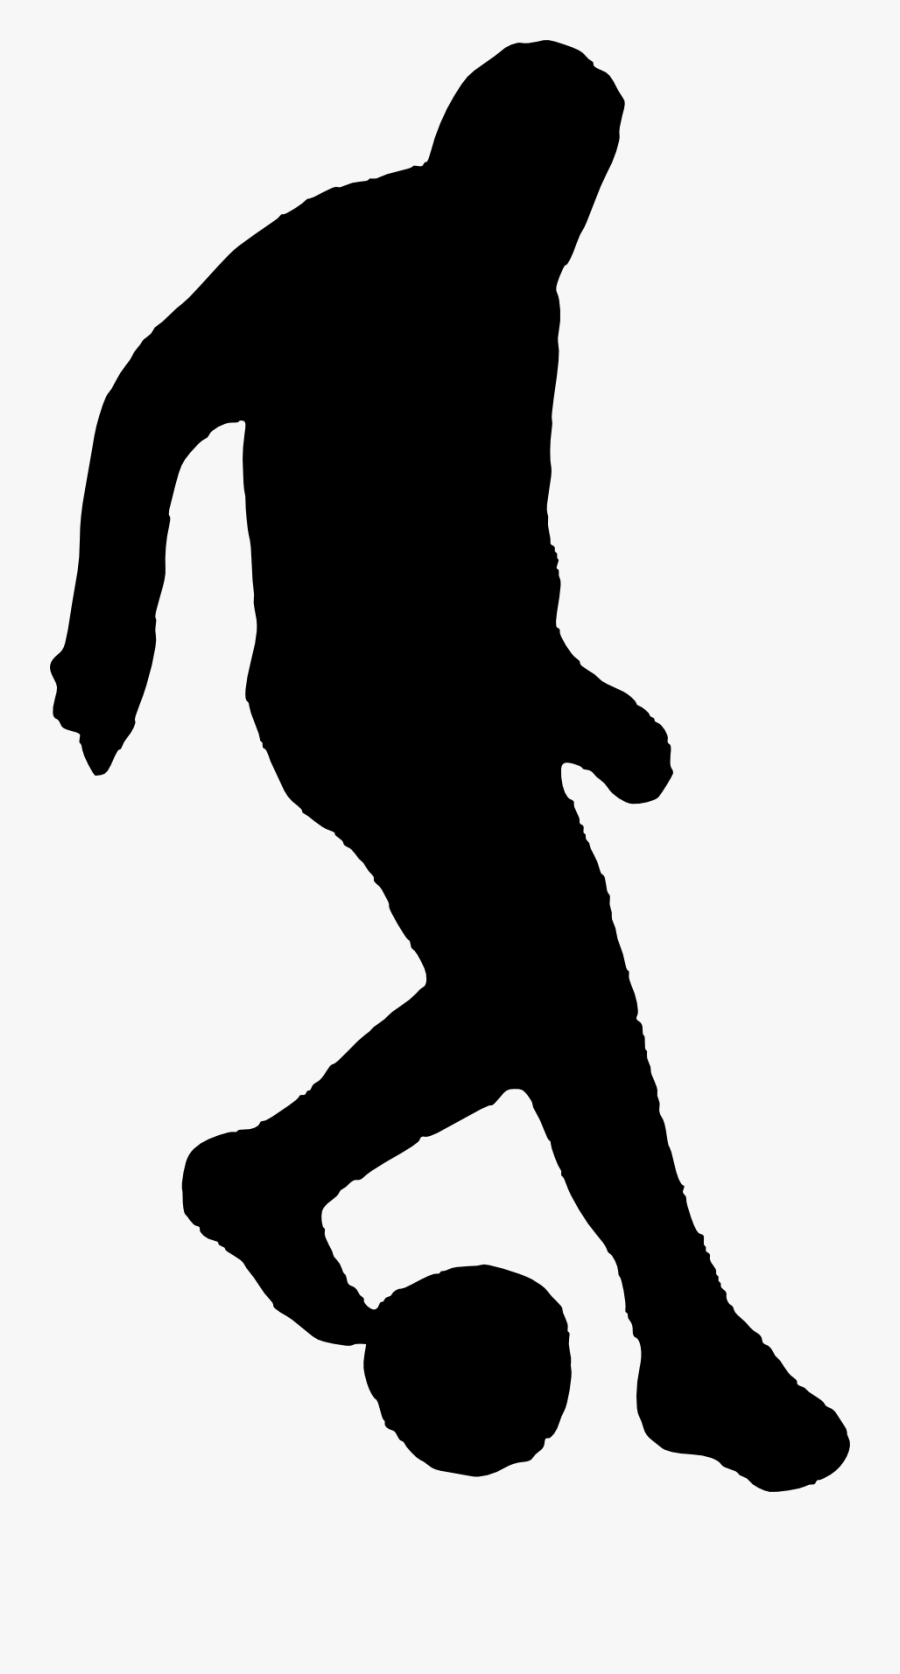 24 Football Player Silhouette - Football Player Silhouette Png, Transparent Clipart